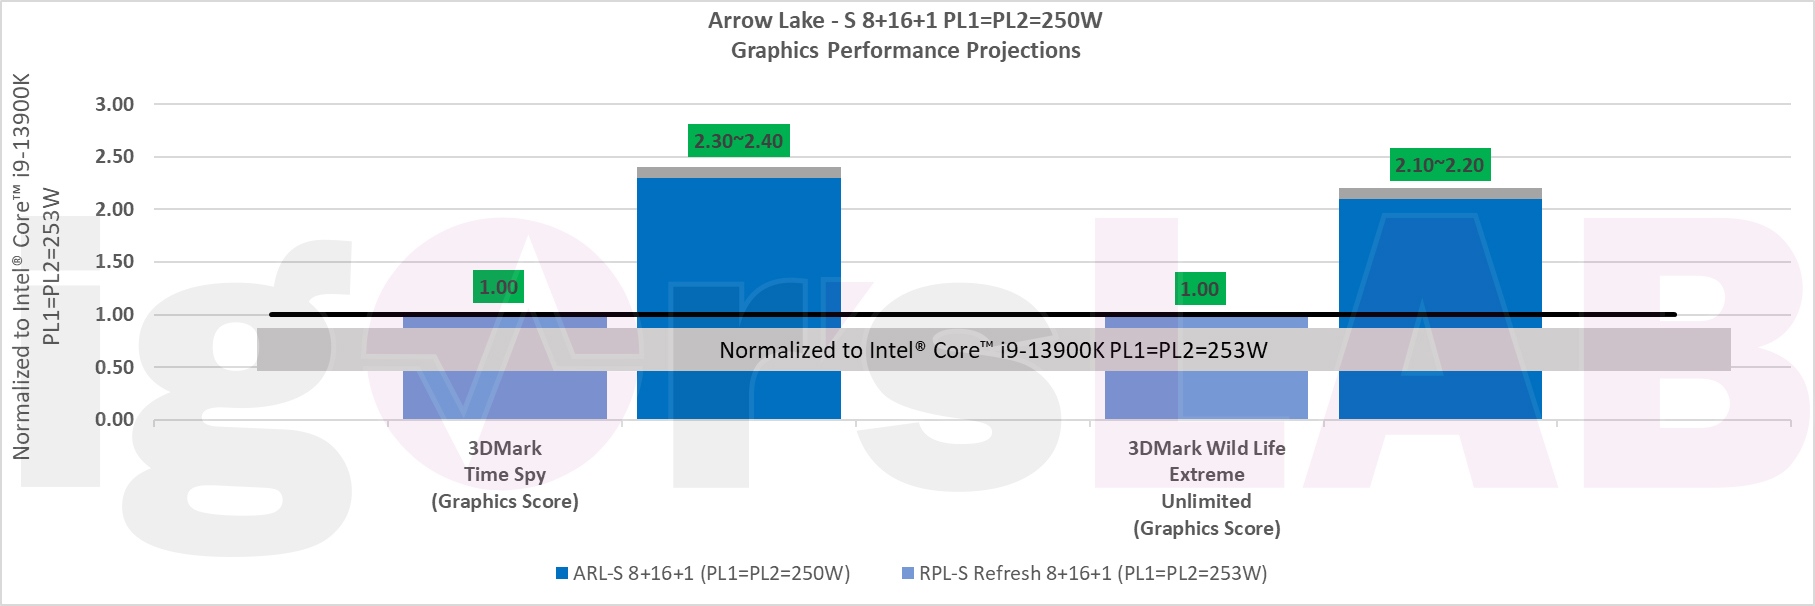 Graphics Card's Battle against Power Supply - Power Consumption and Peak  Power Demystified, igorsLAB